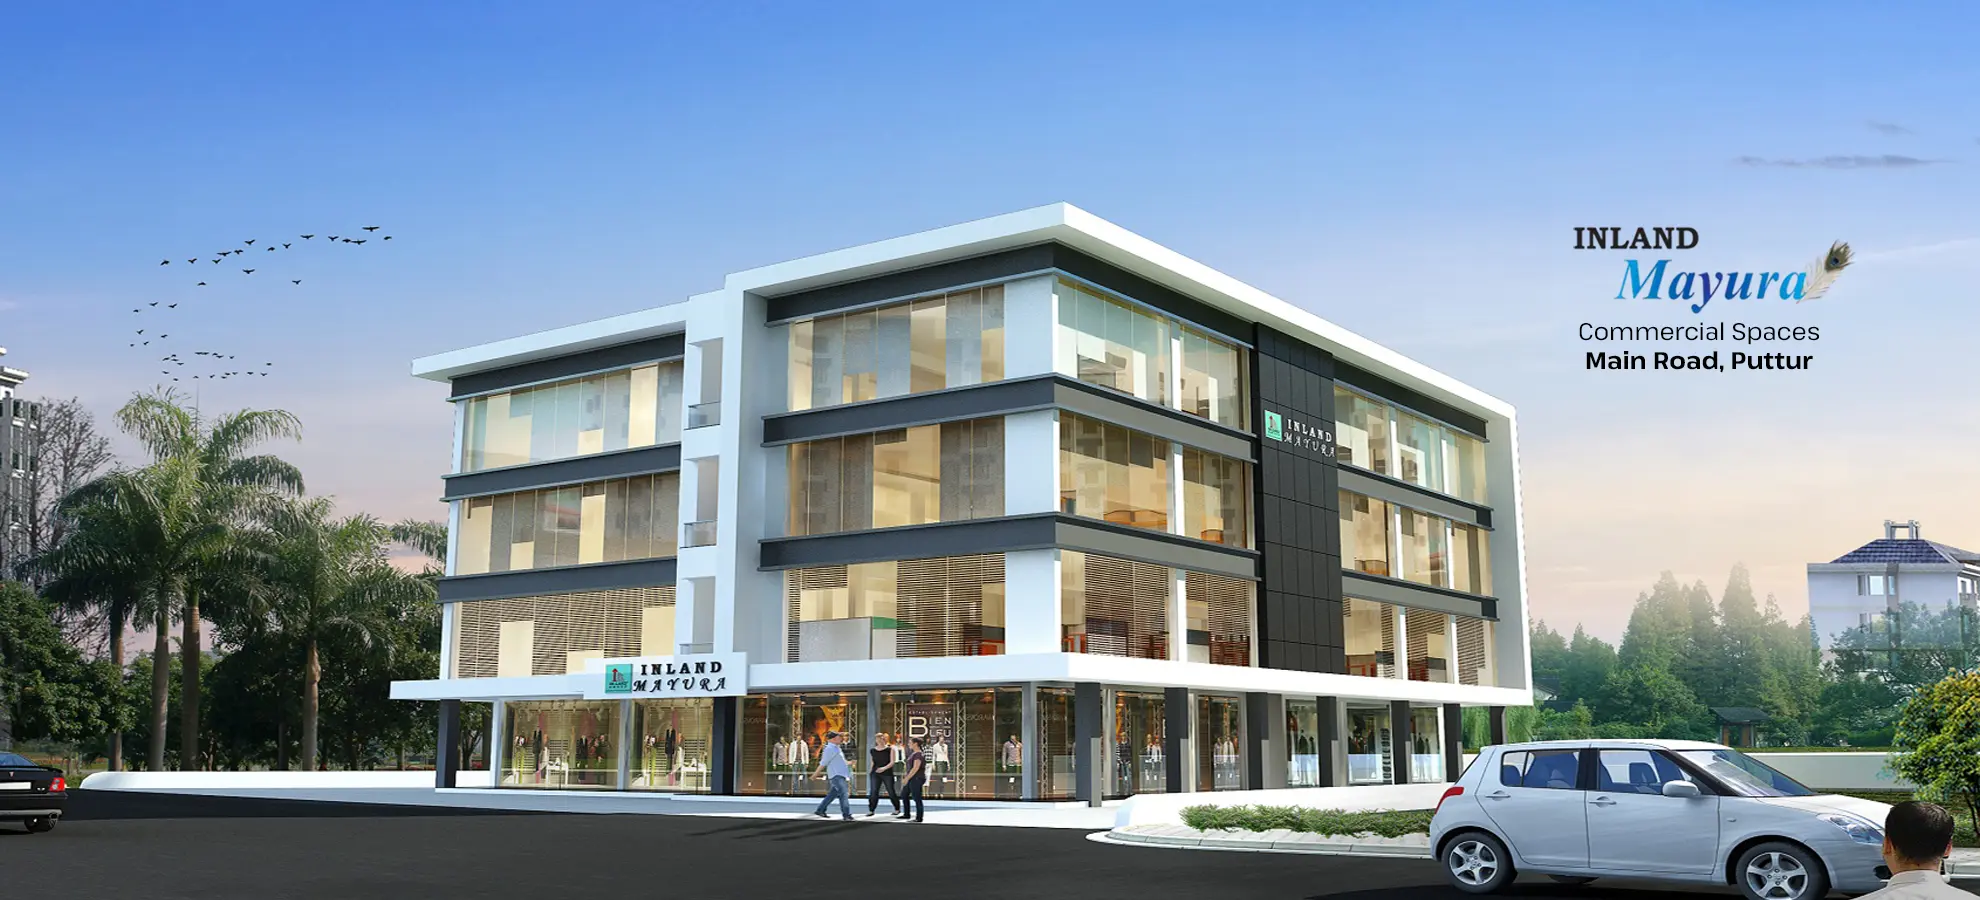 IN-LAND Mayura - Residential Complex and Shopping Mall in Puttur